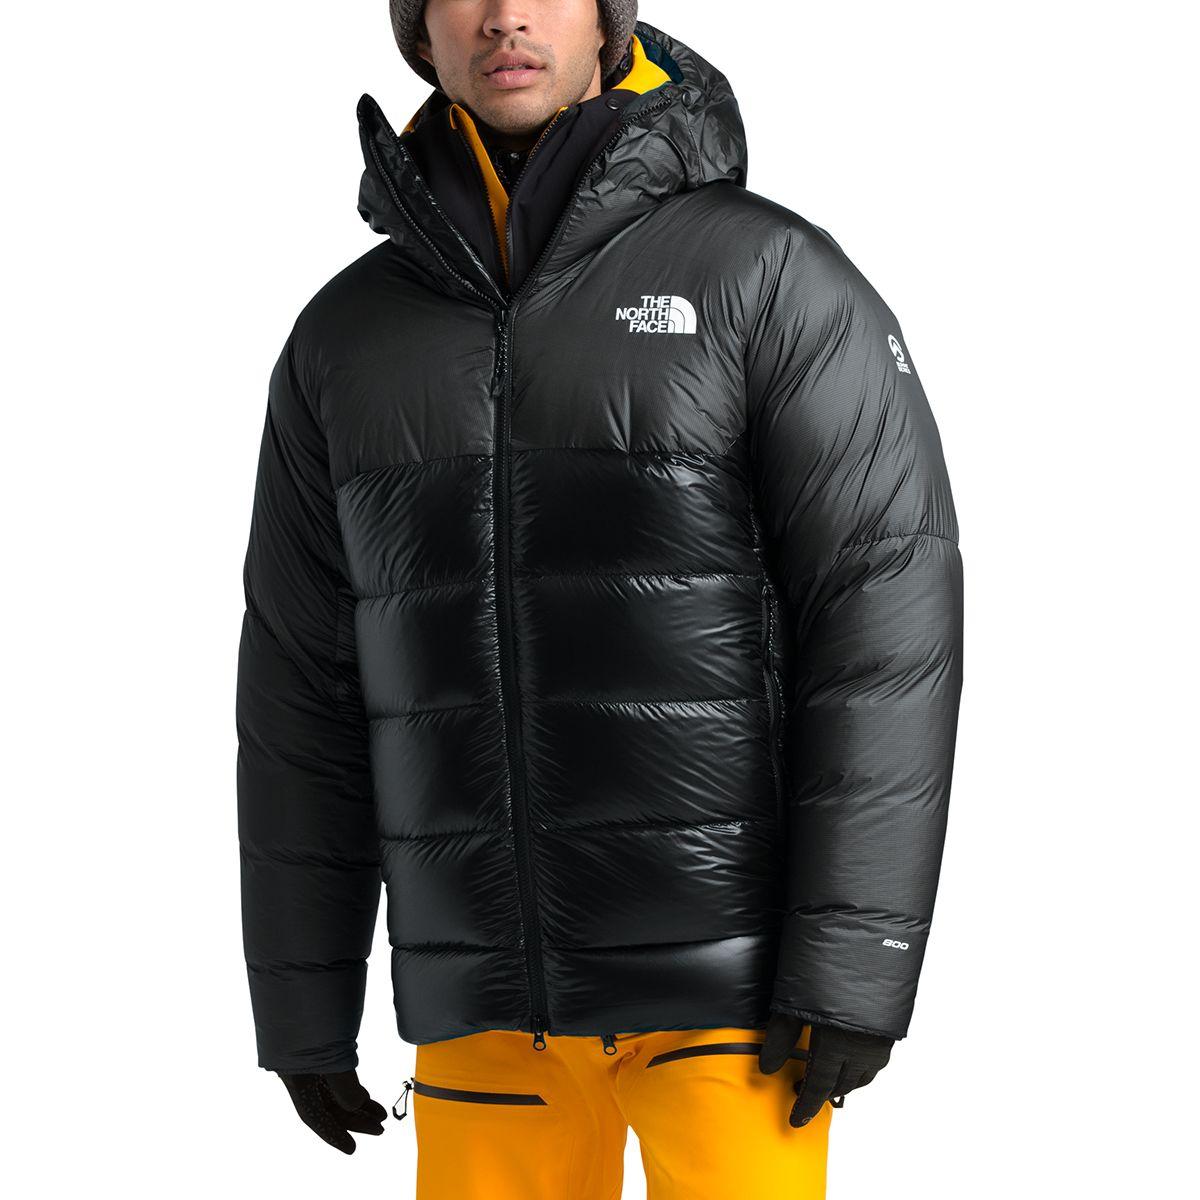 The North Face Synthetic Summit L6 Down Belay Parka in Black for Men - Lyst